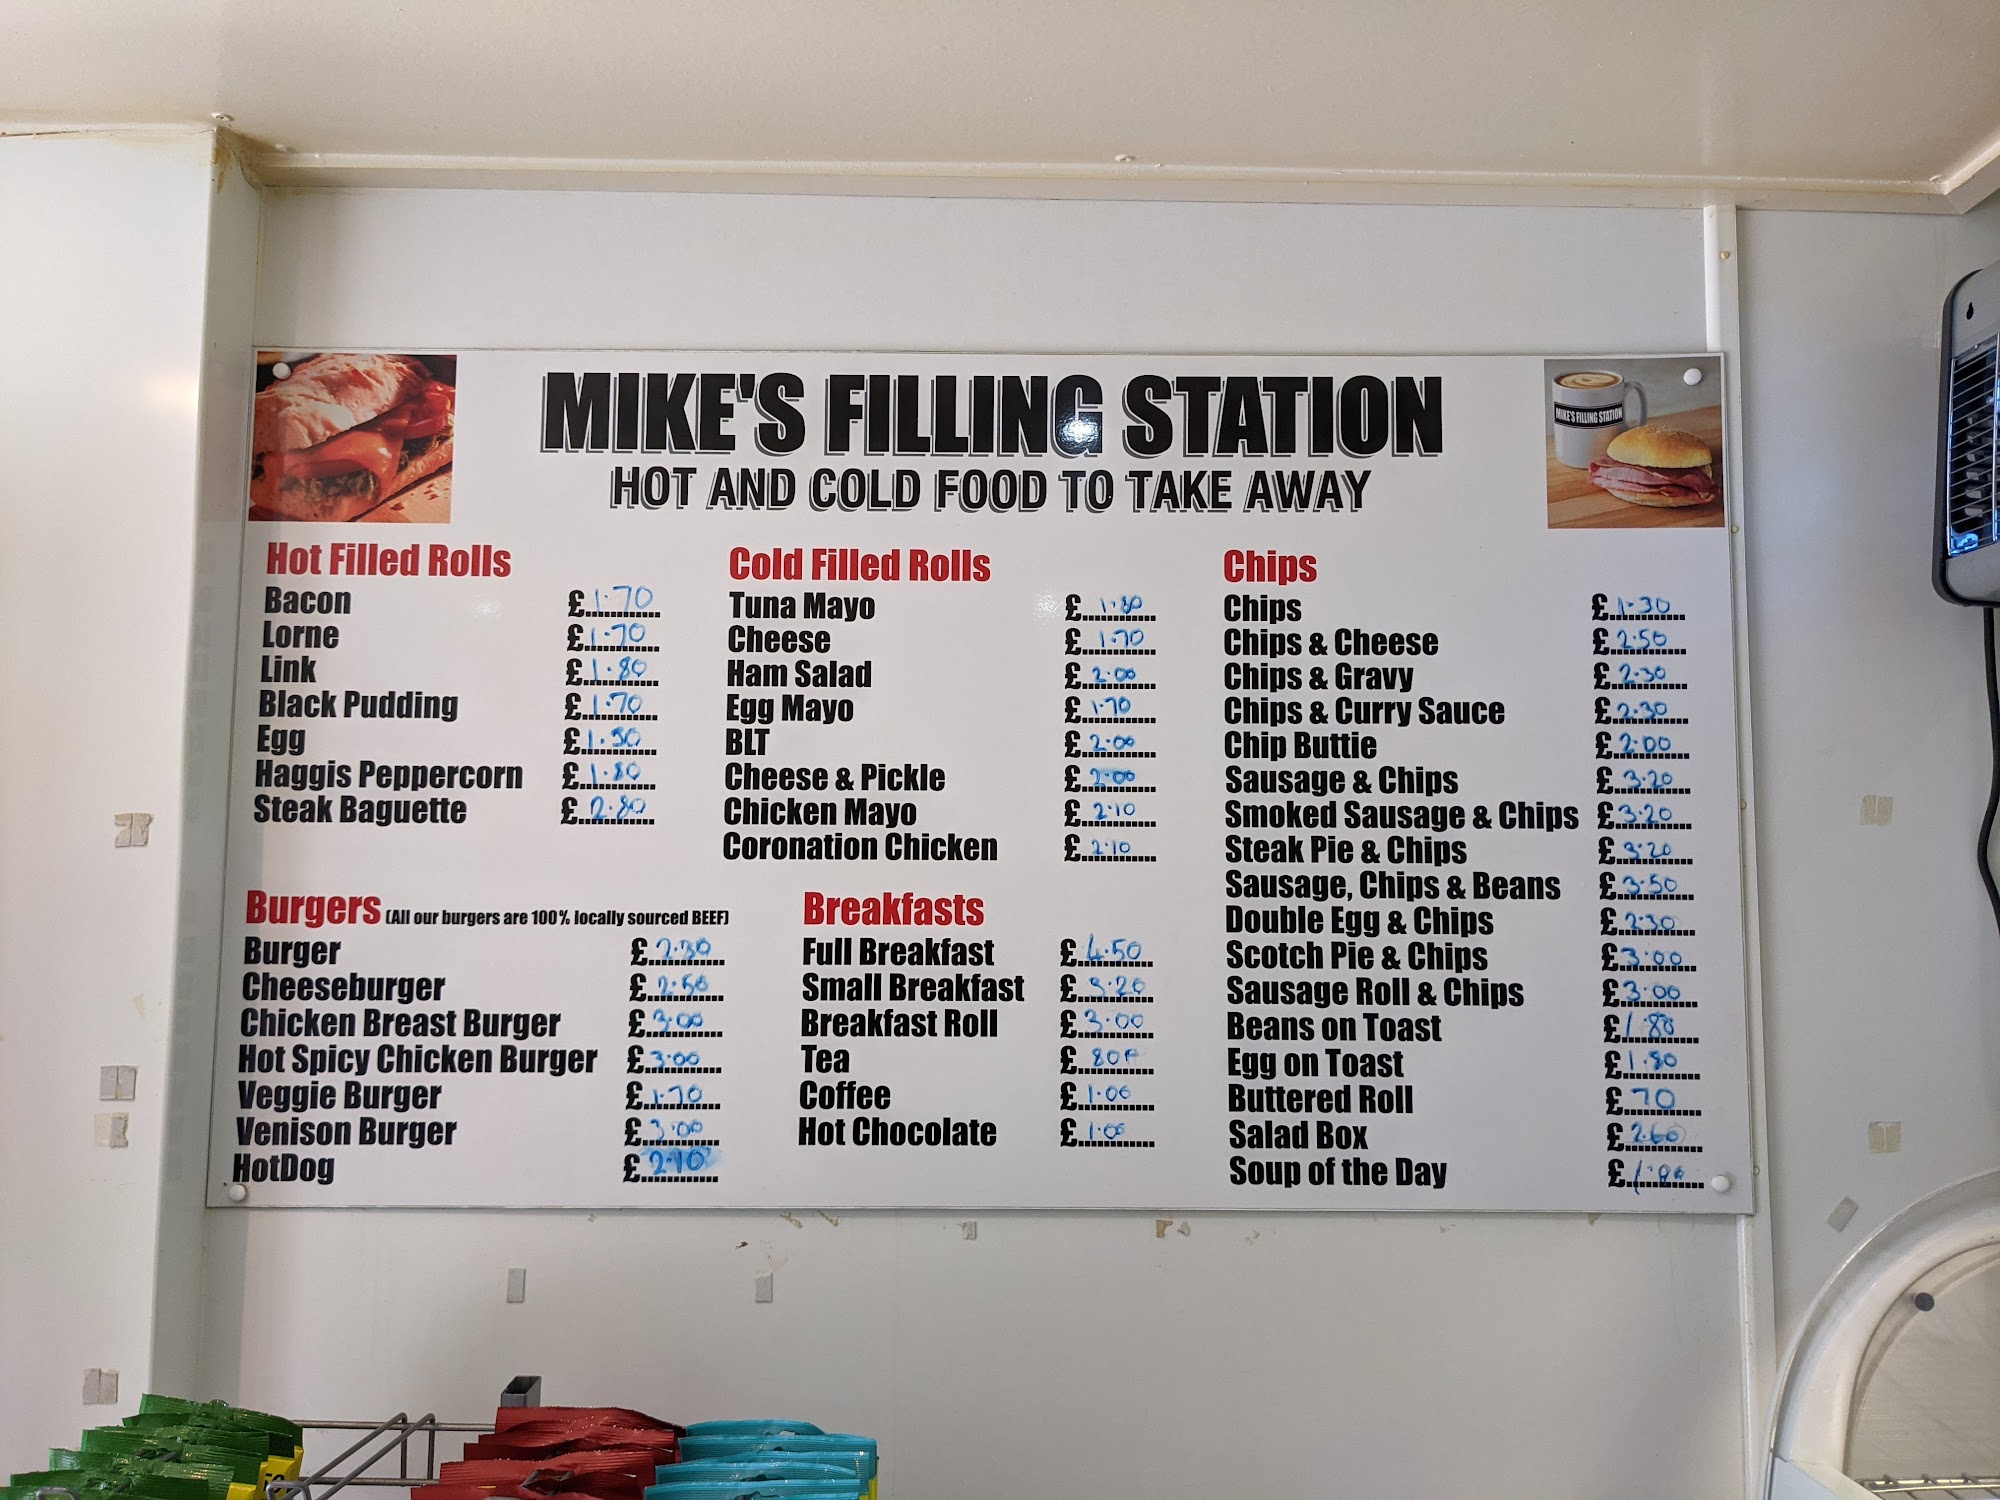 Mikes filling station